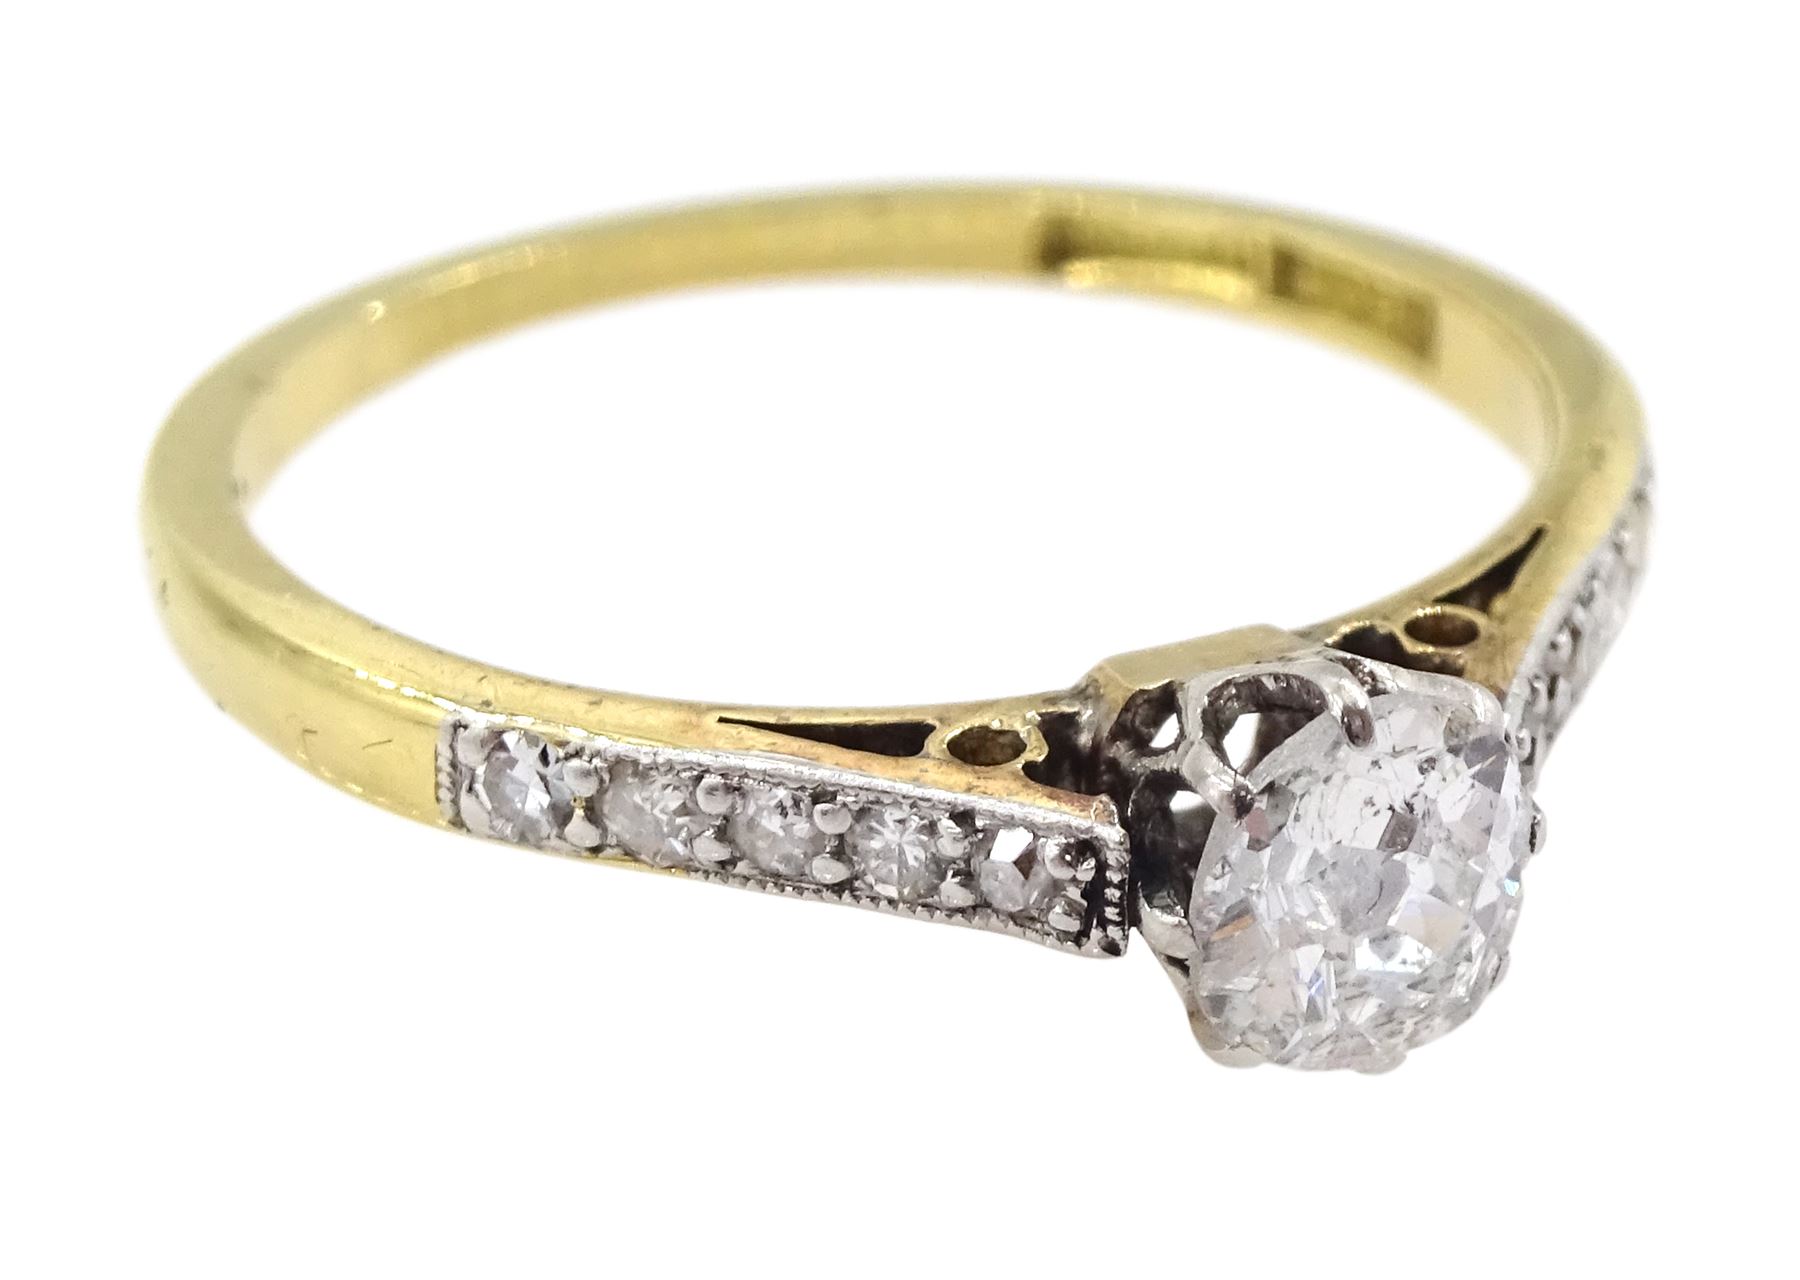 Early 20th century single stone old cut diamond ring - Image 3 of 4